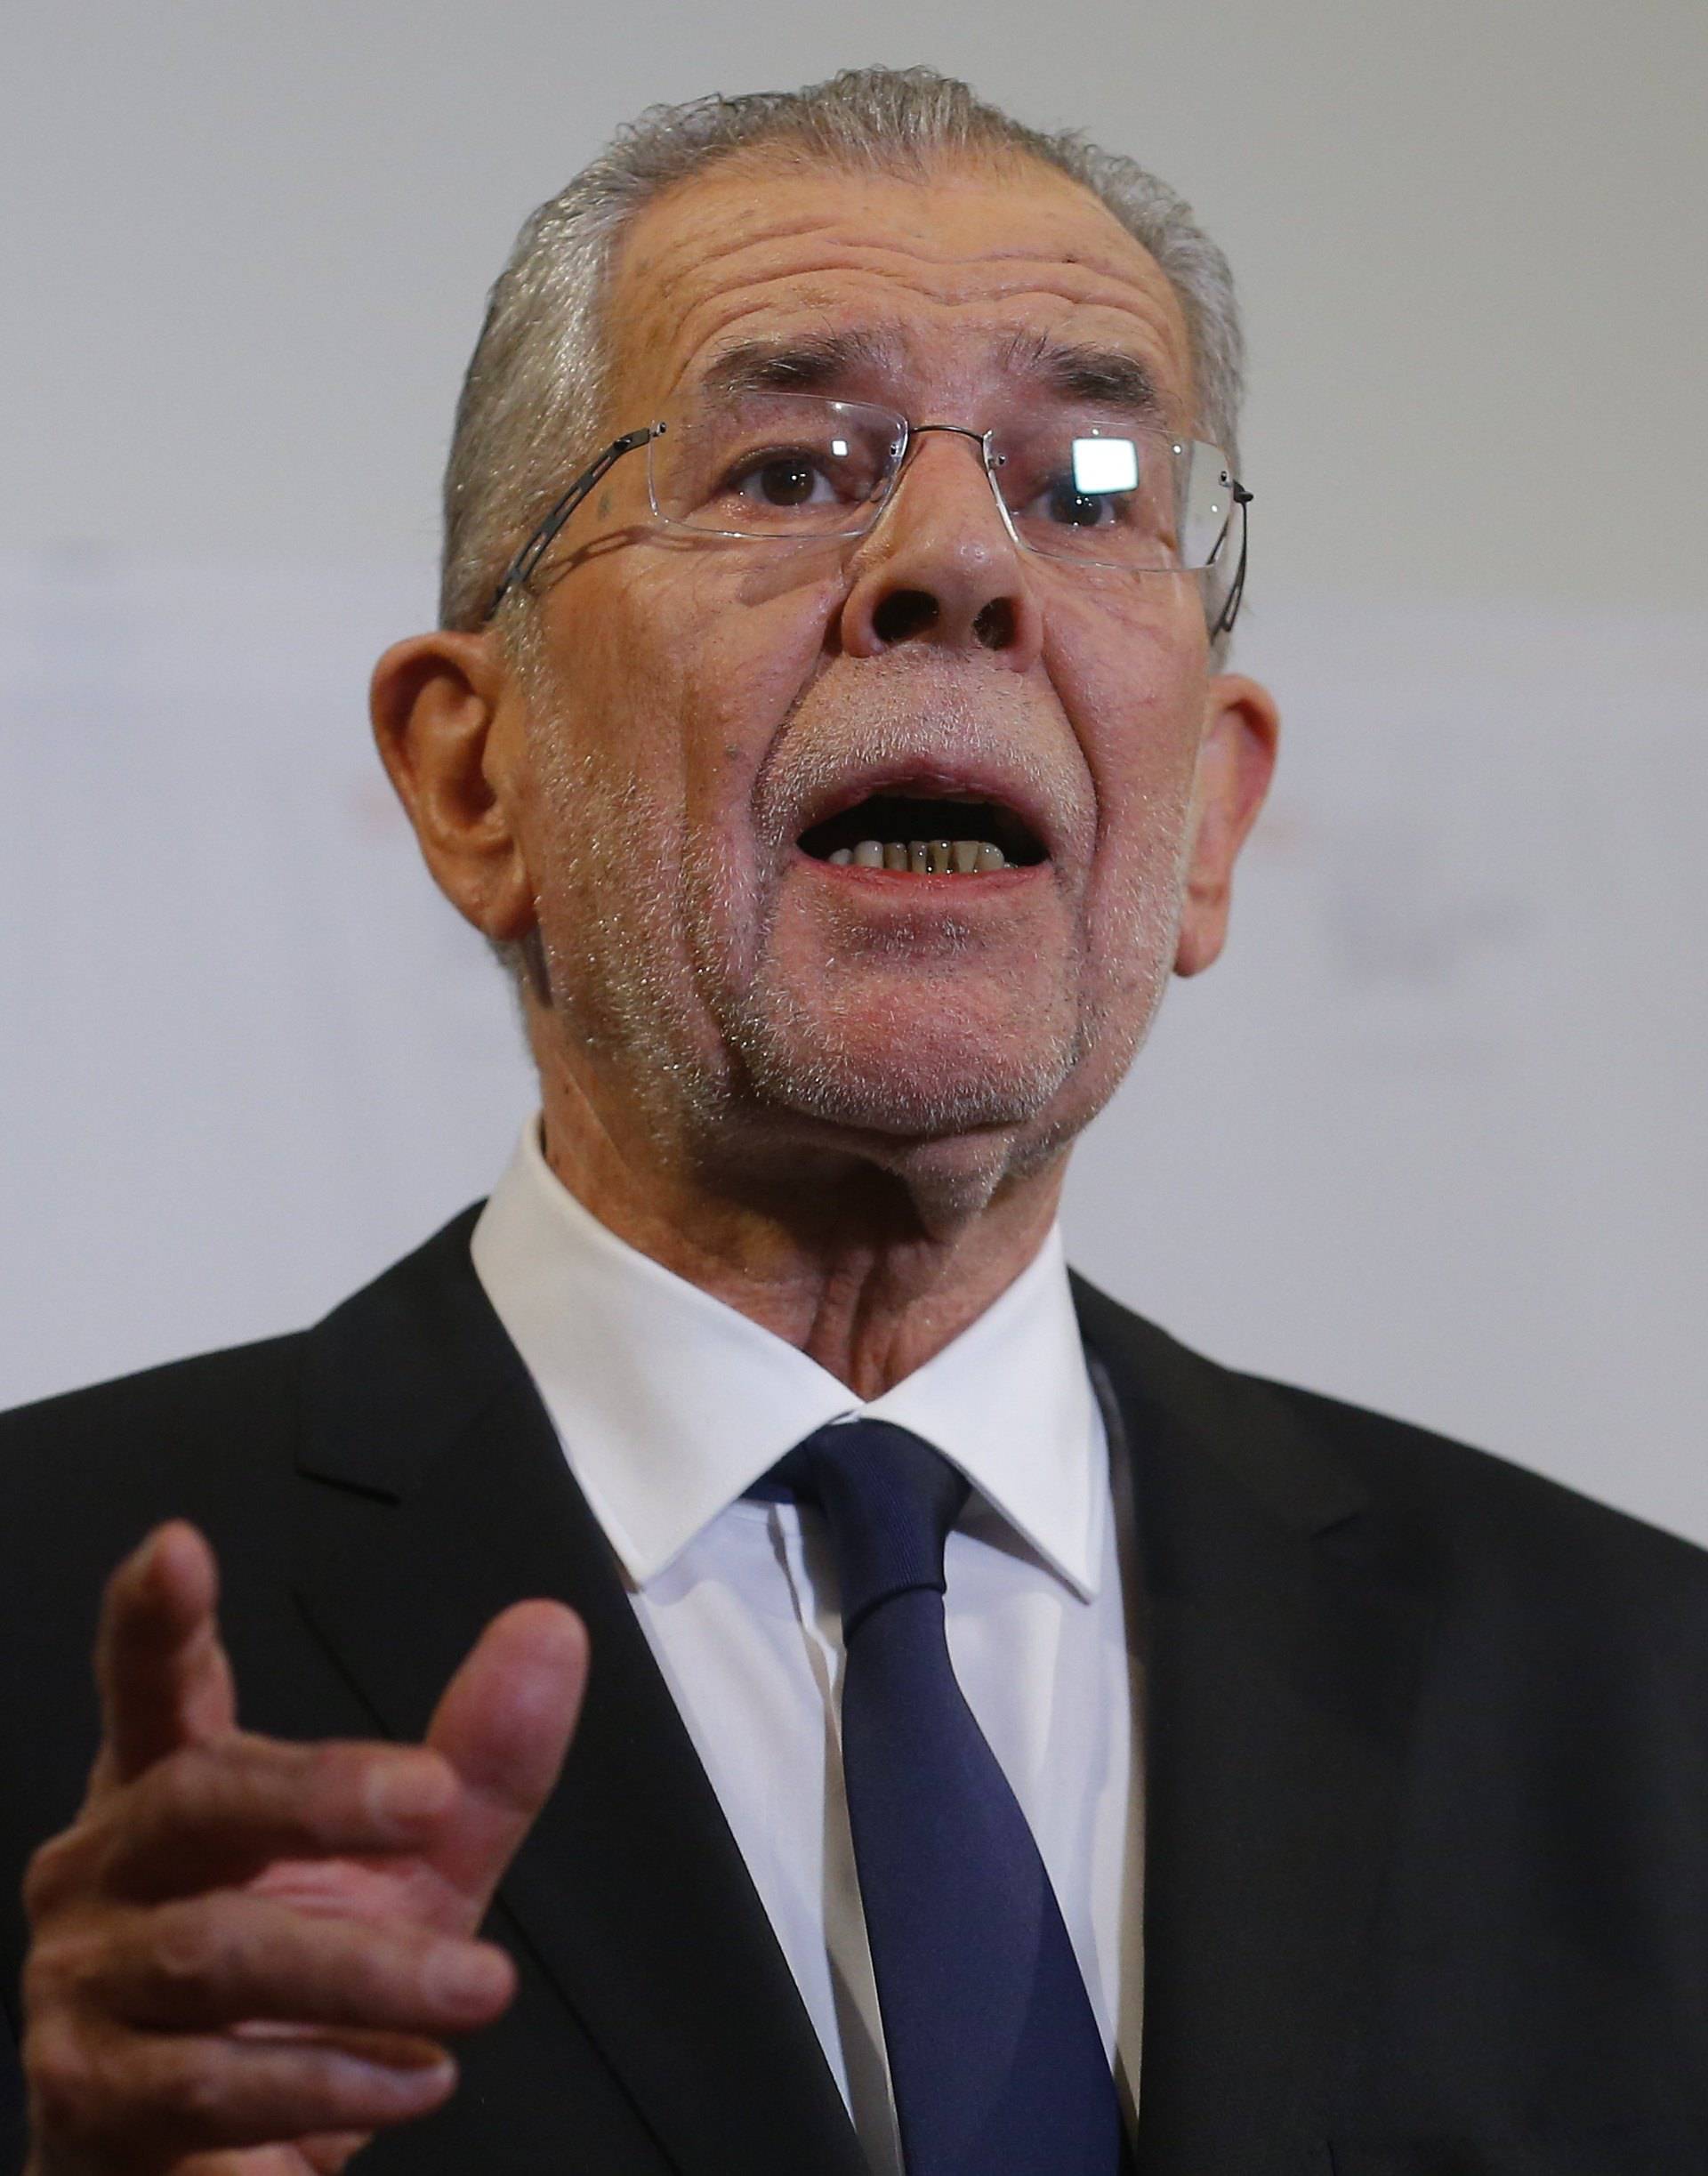 Austrian presidential candidate Van der Bellen, who is supported by the Greens, adresses the media during a press conference in Vienna